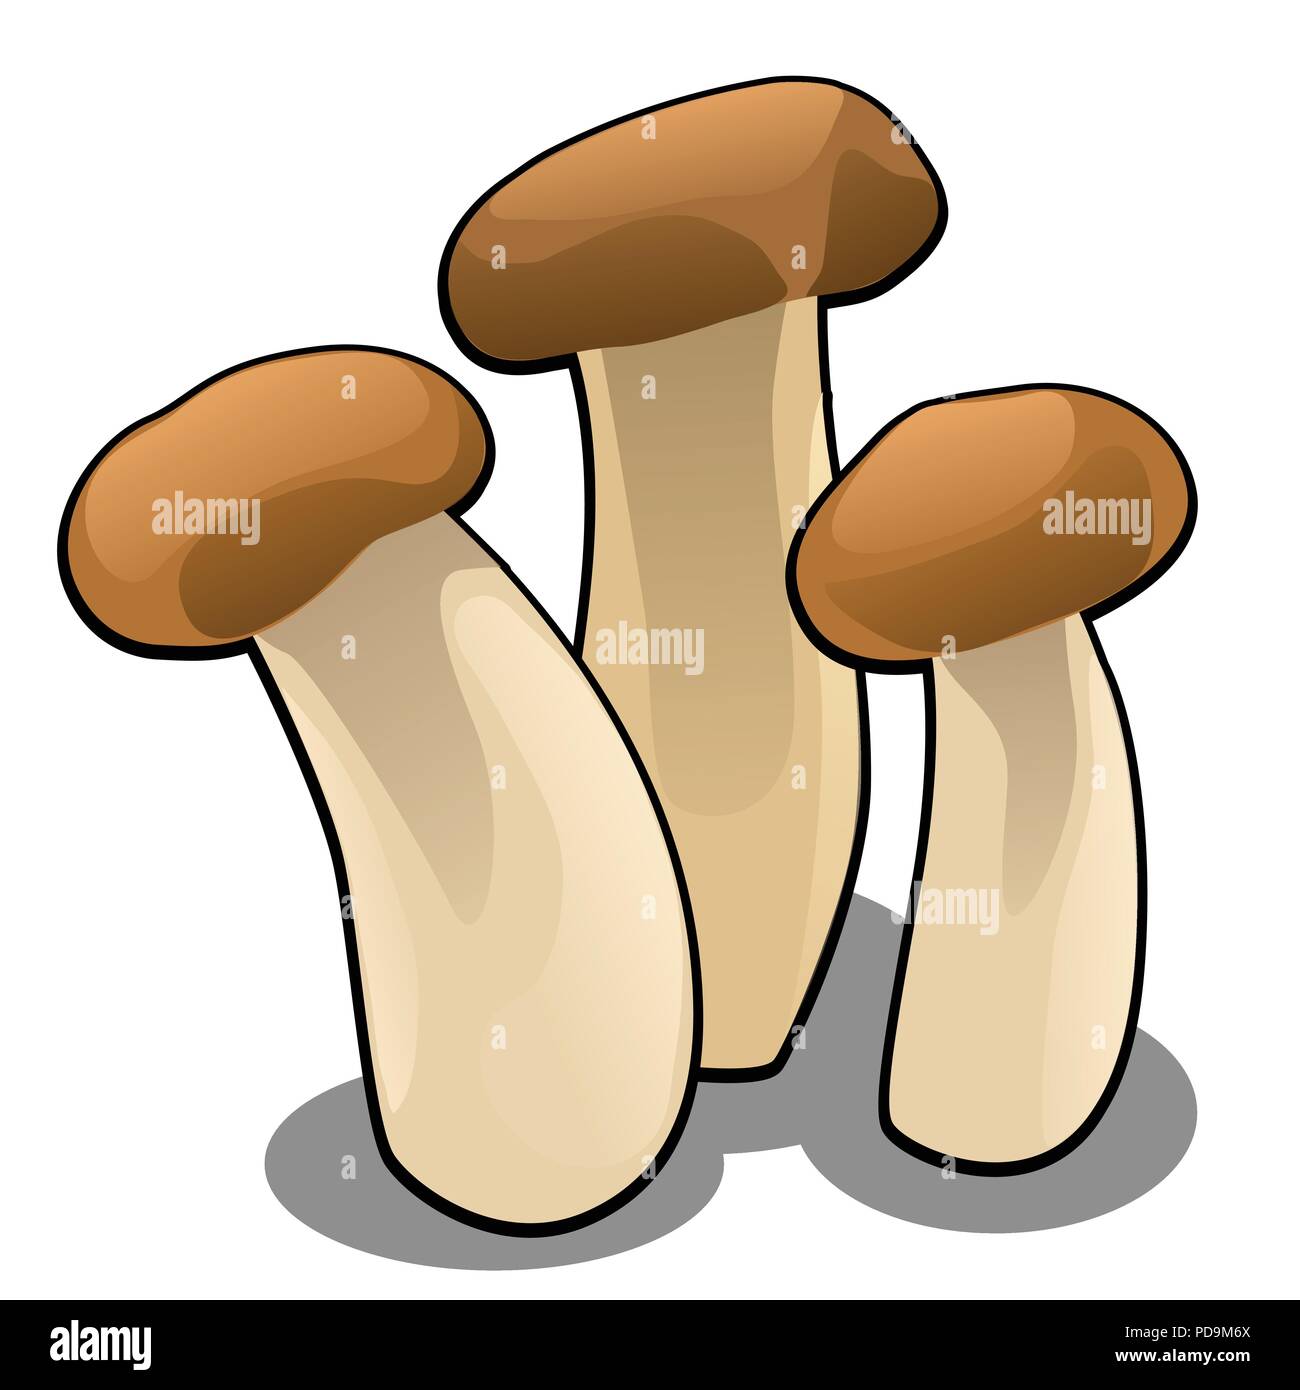 Group of forest cartoon mushrooms isolated on white background close-up. Vector cartoon close-up illustration. Stock Vector